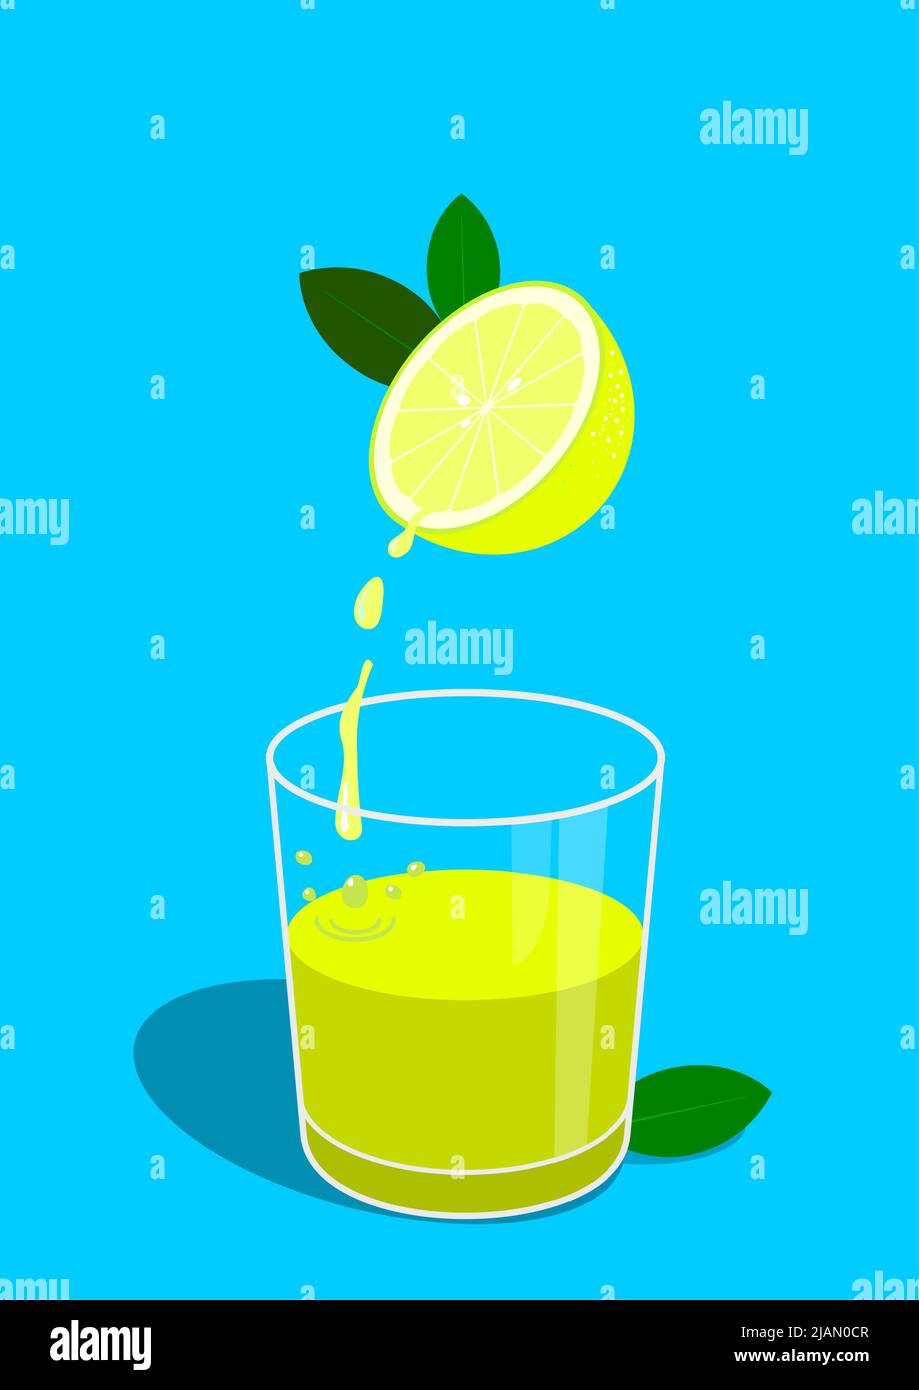 Healthy illustration of a half lemon from which the juice flows into a glass underneath. Flat and vivid colors. Cool and fun Stock Vector